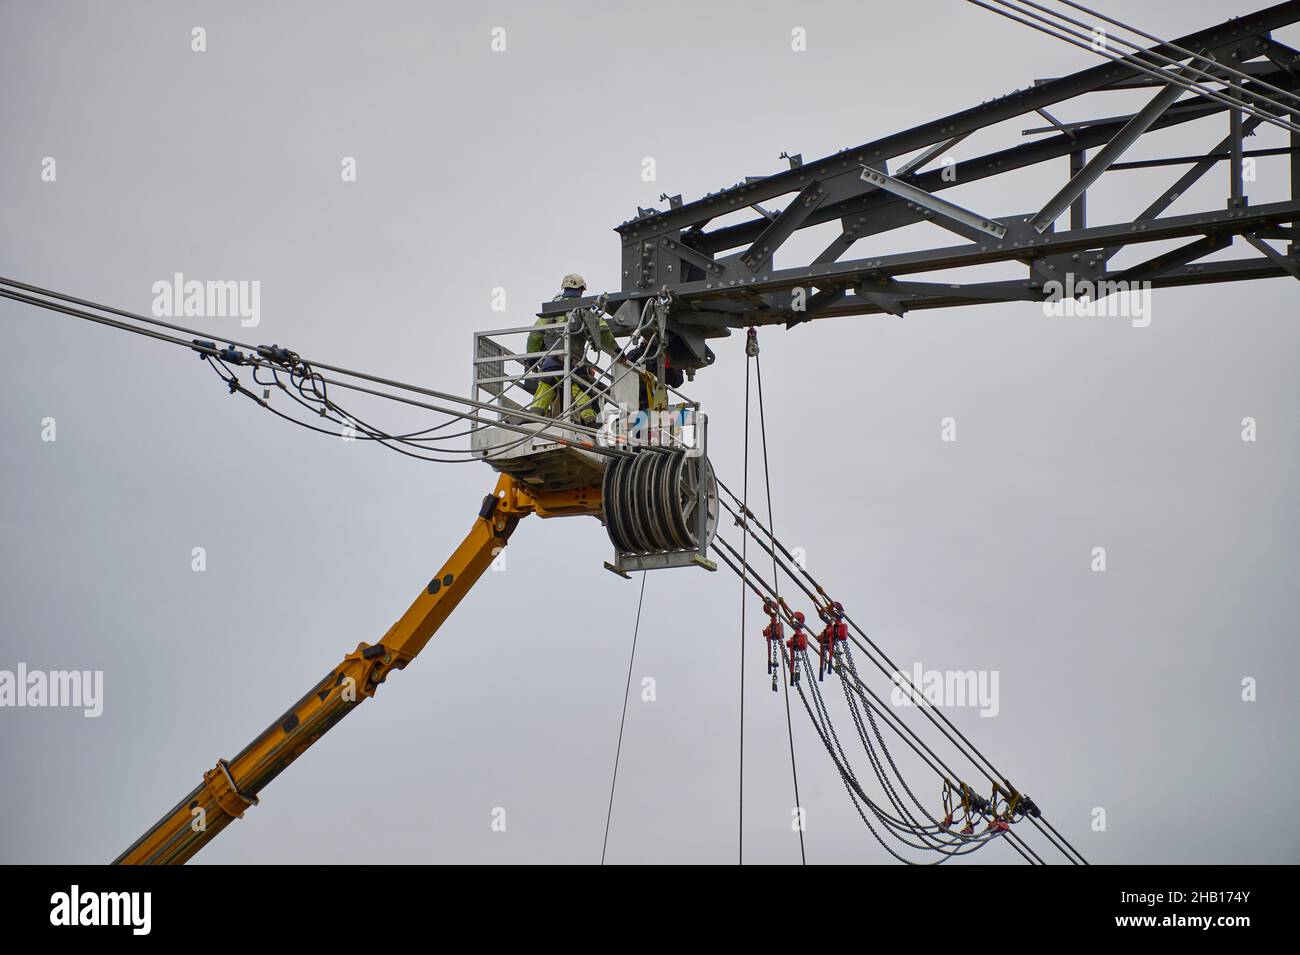 Henin-Beaumont (northern France), on September 30, 2021: building work, project to rebuild a 400 kV double electrical link over 30 km between Lille an Stock Photo